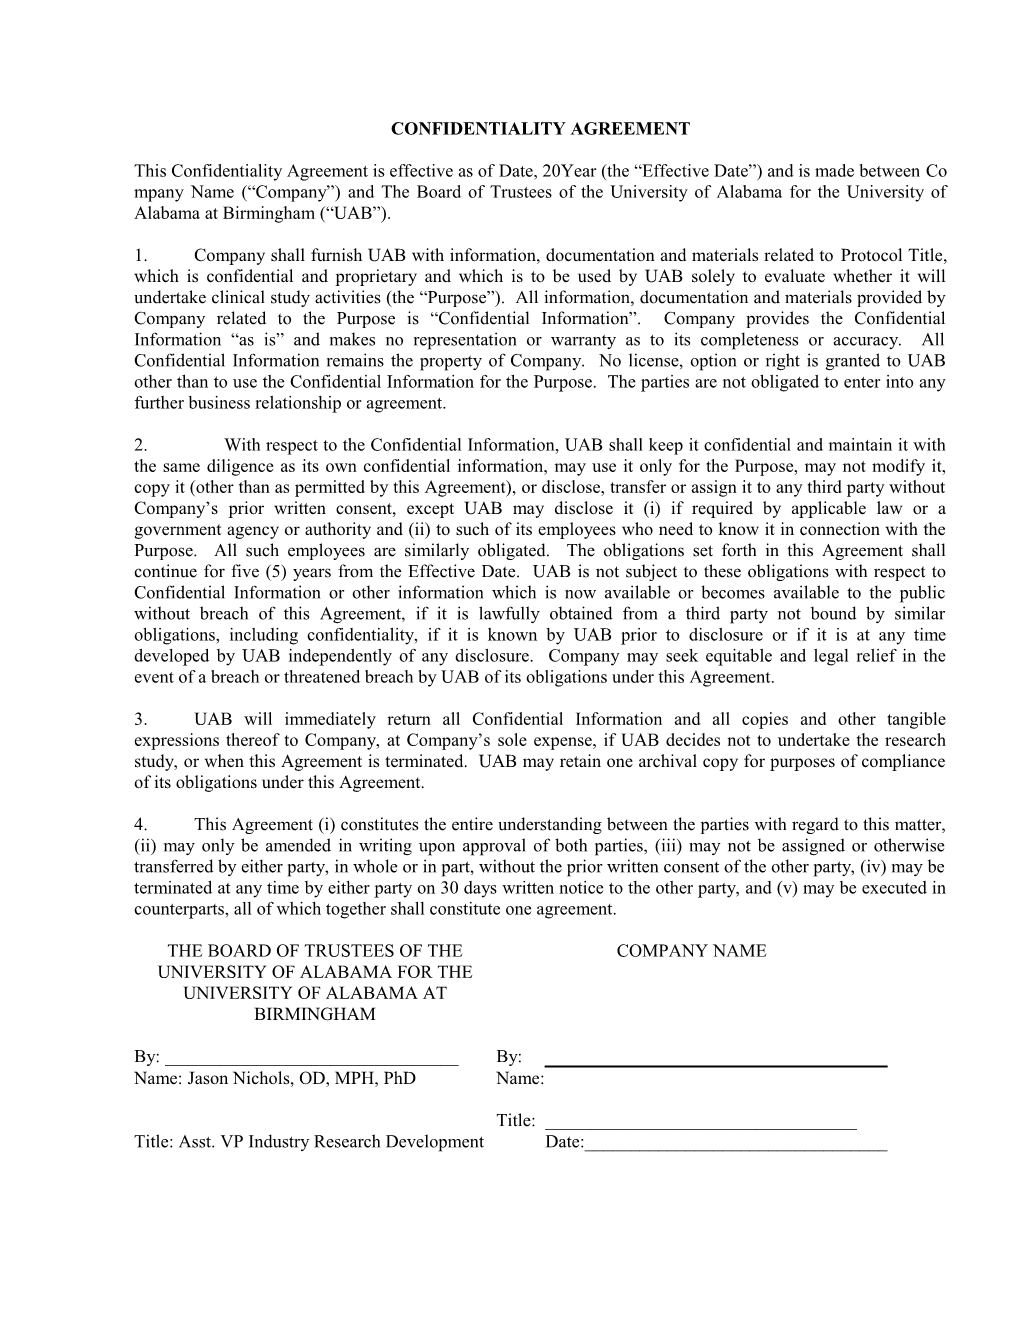 Confidentiality Agreement s9